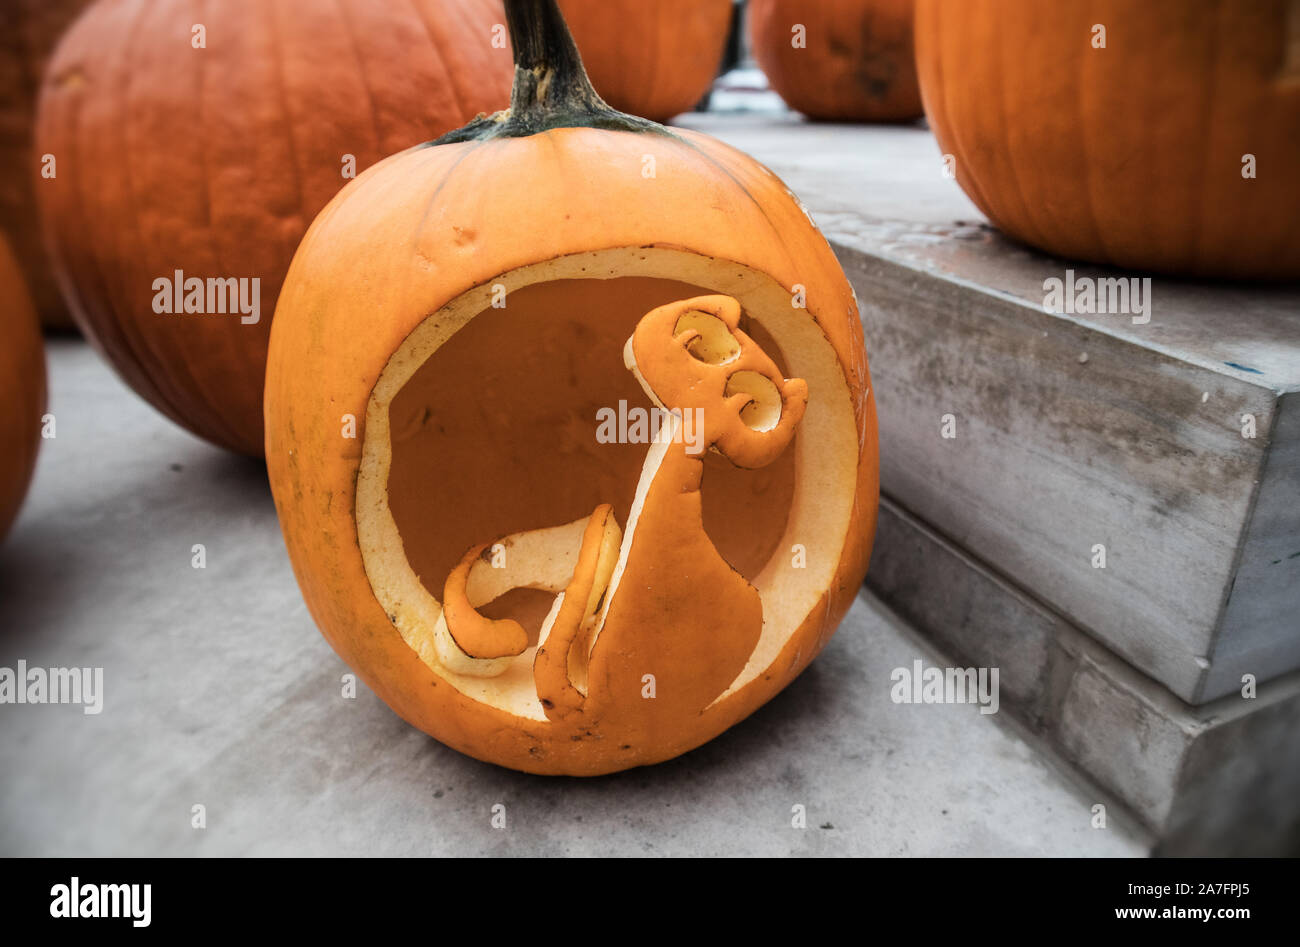 Cat carved in the Halloween pumpkin. Stock Photo